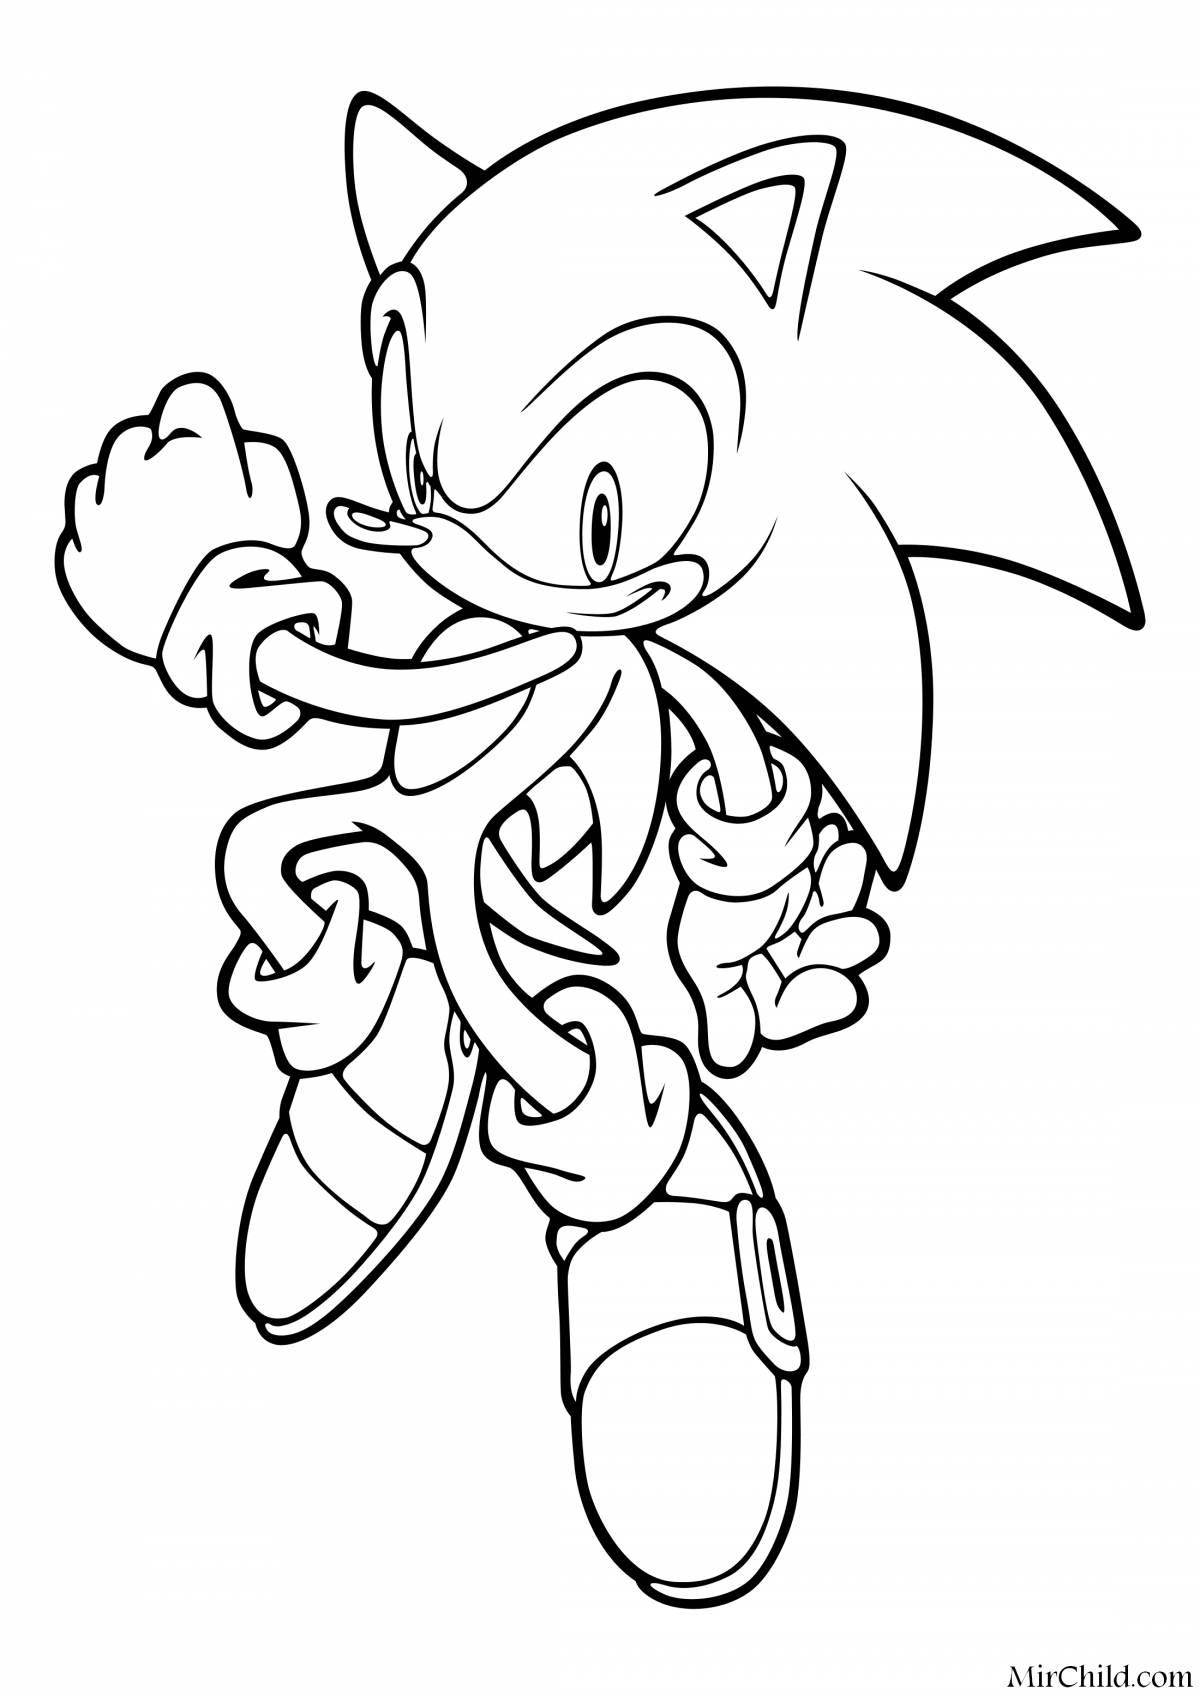 Sonic prime dazzling coloring book